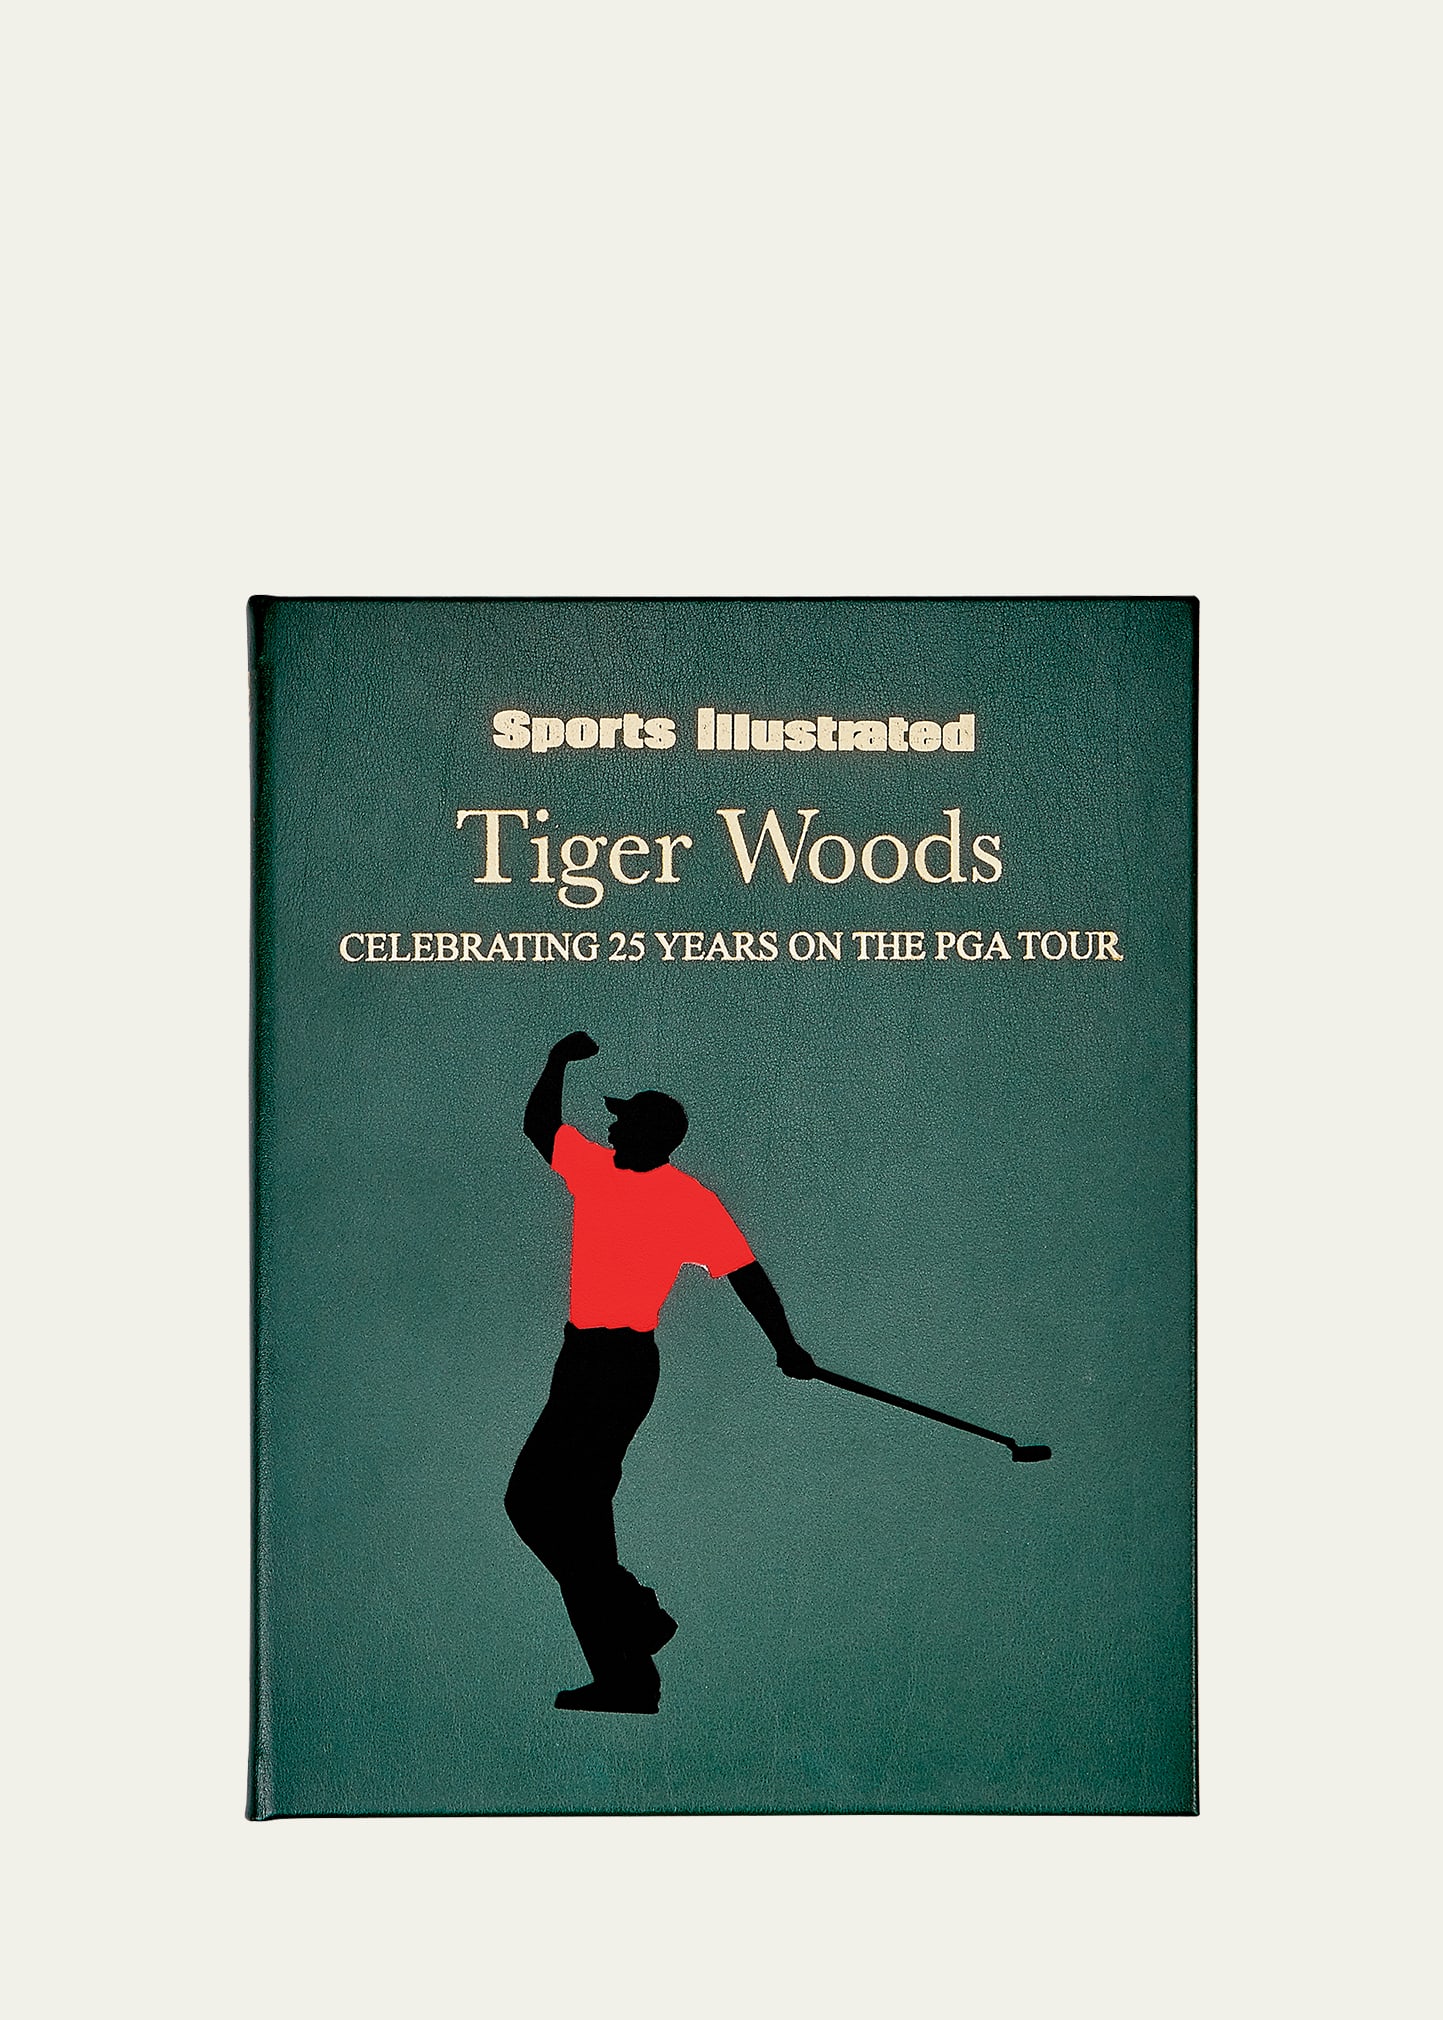 "Tiger Woods - Celebrating 25 Years on the PGA Tour" Personalizable Book